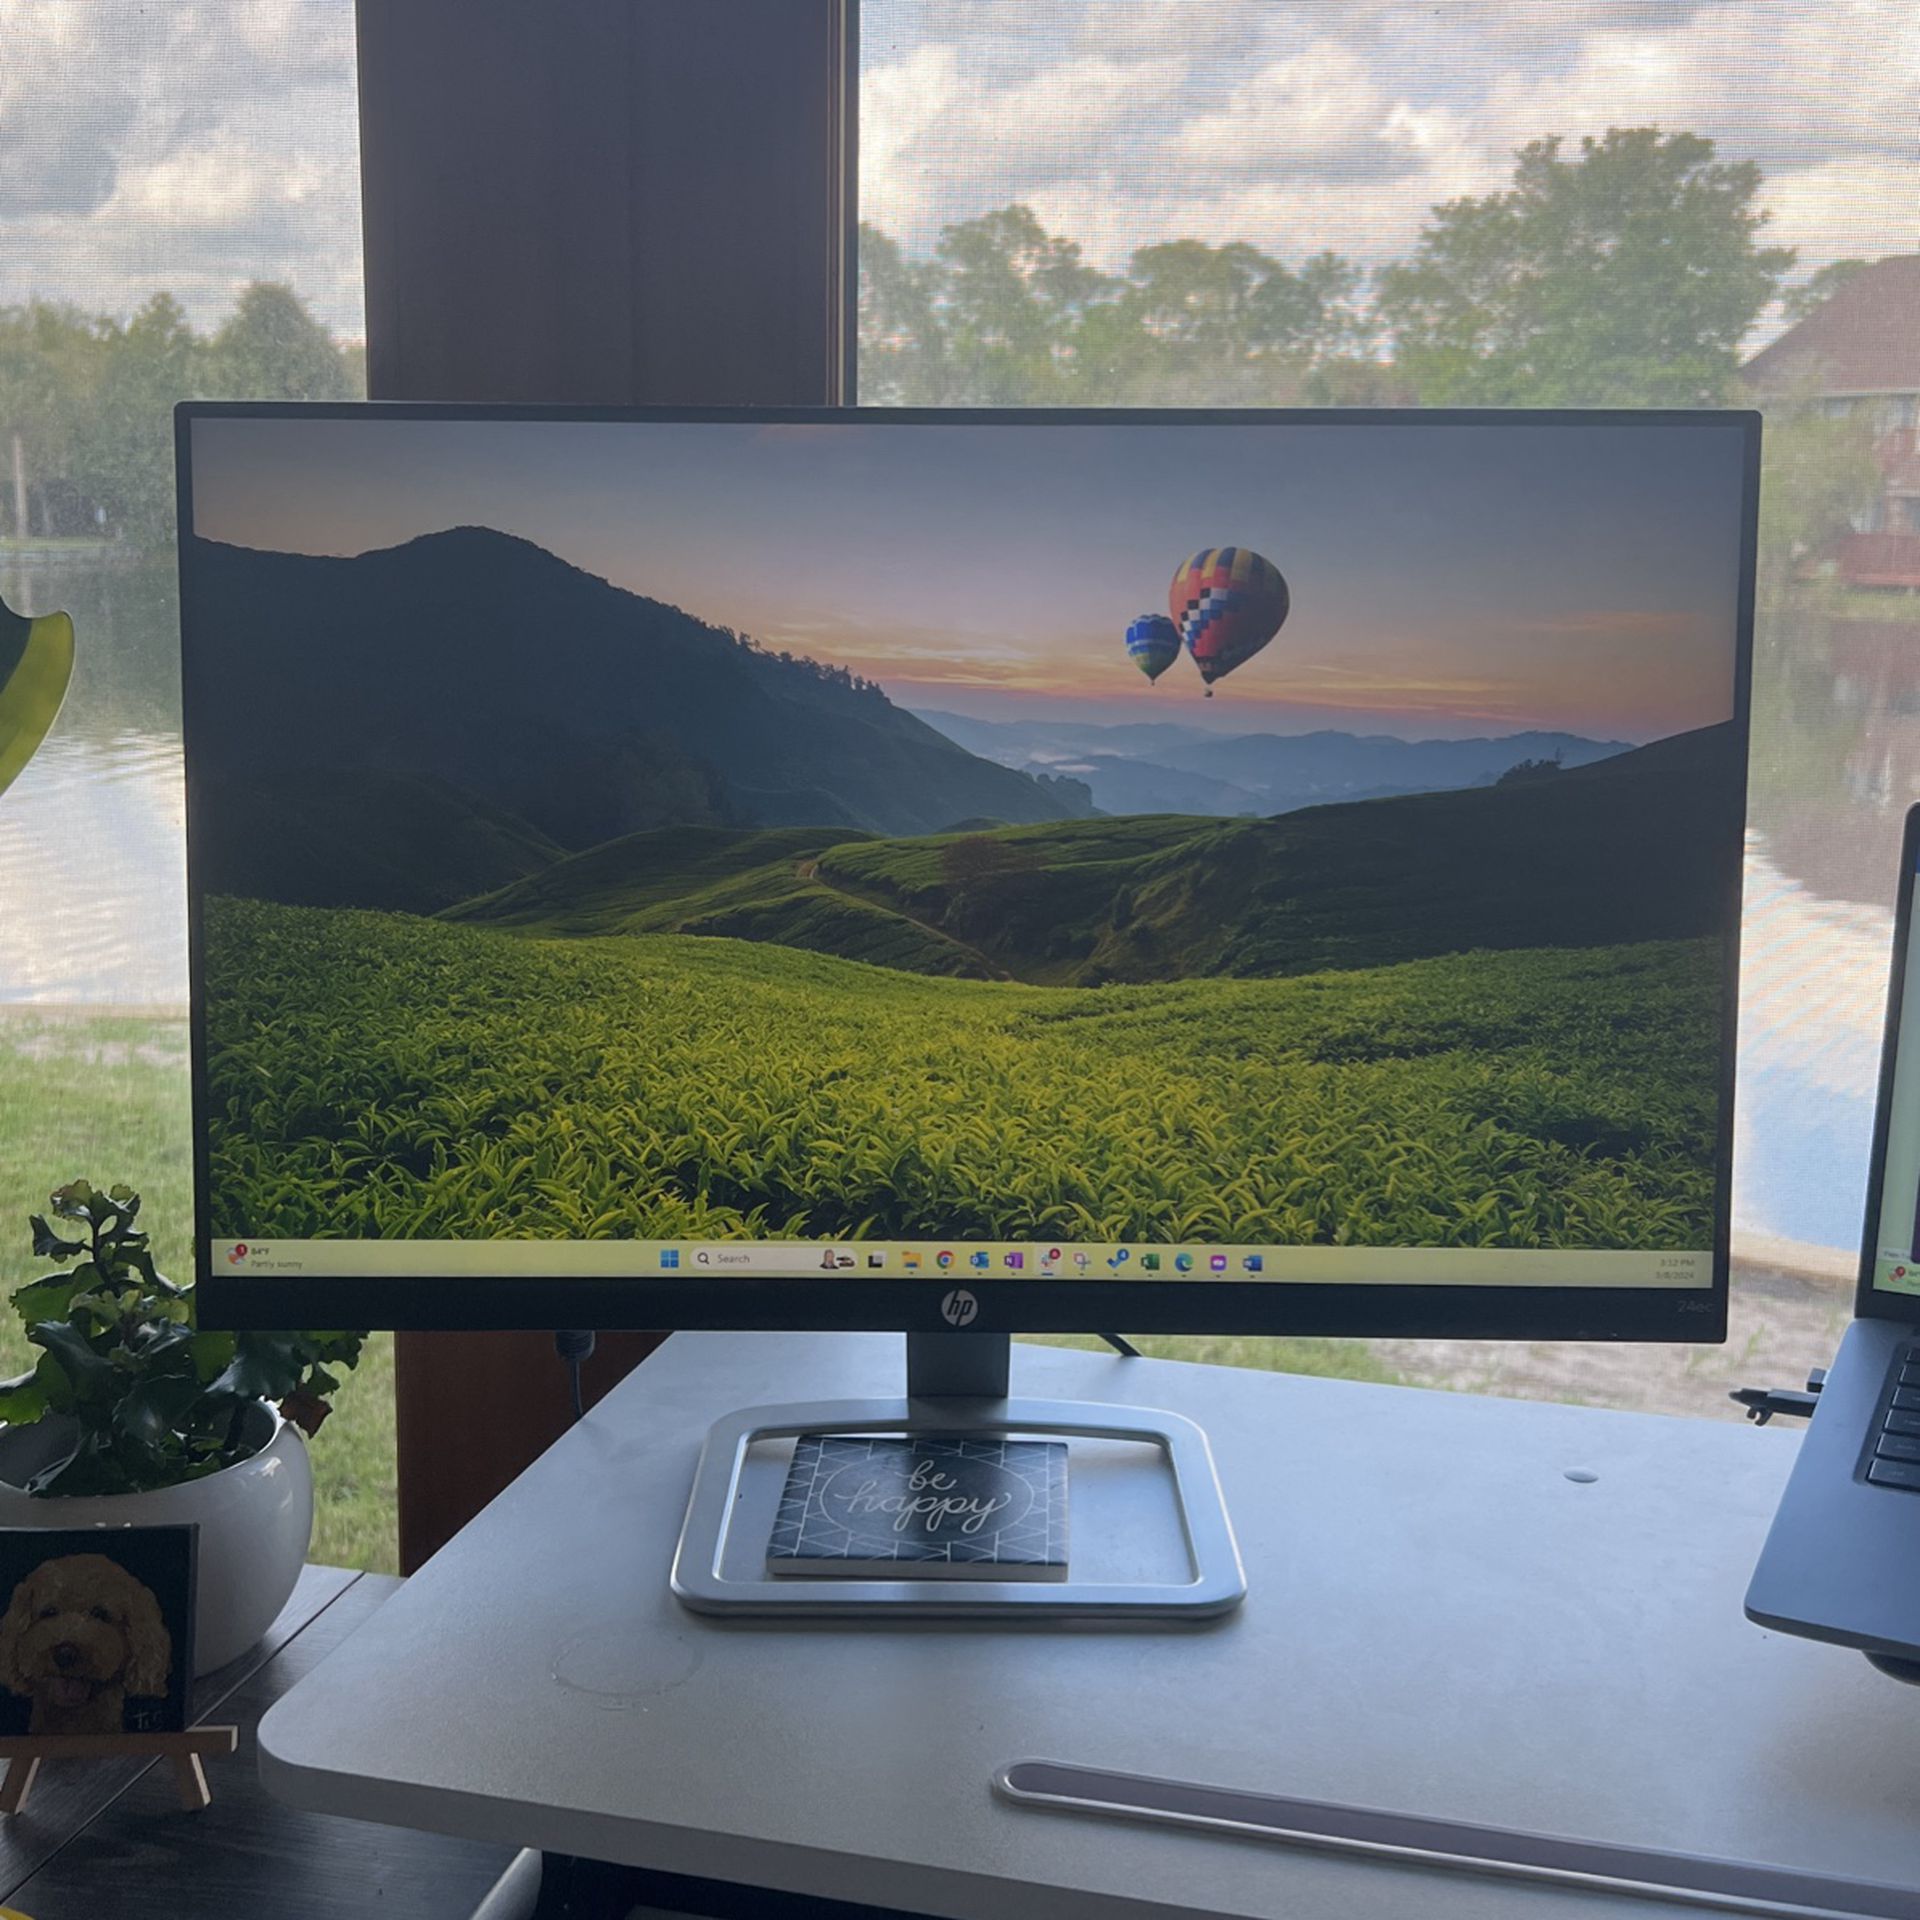 Almost New 24.8” HP Monitor